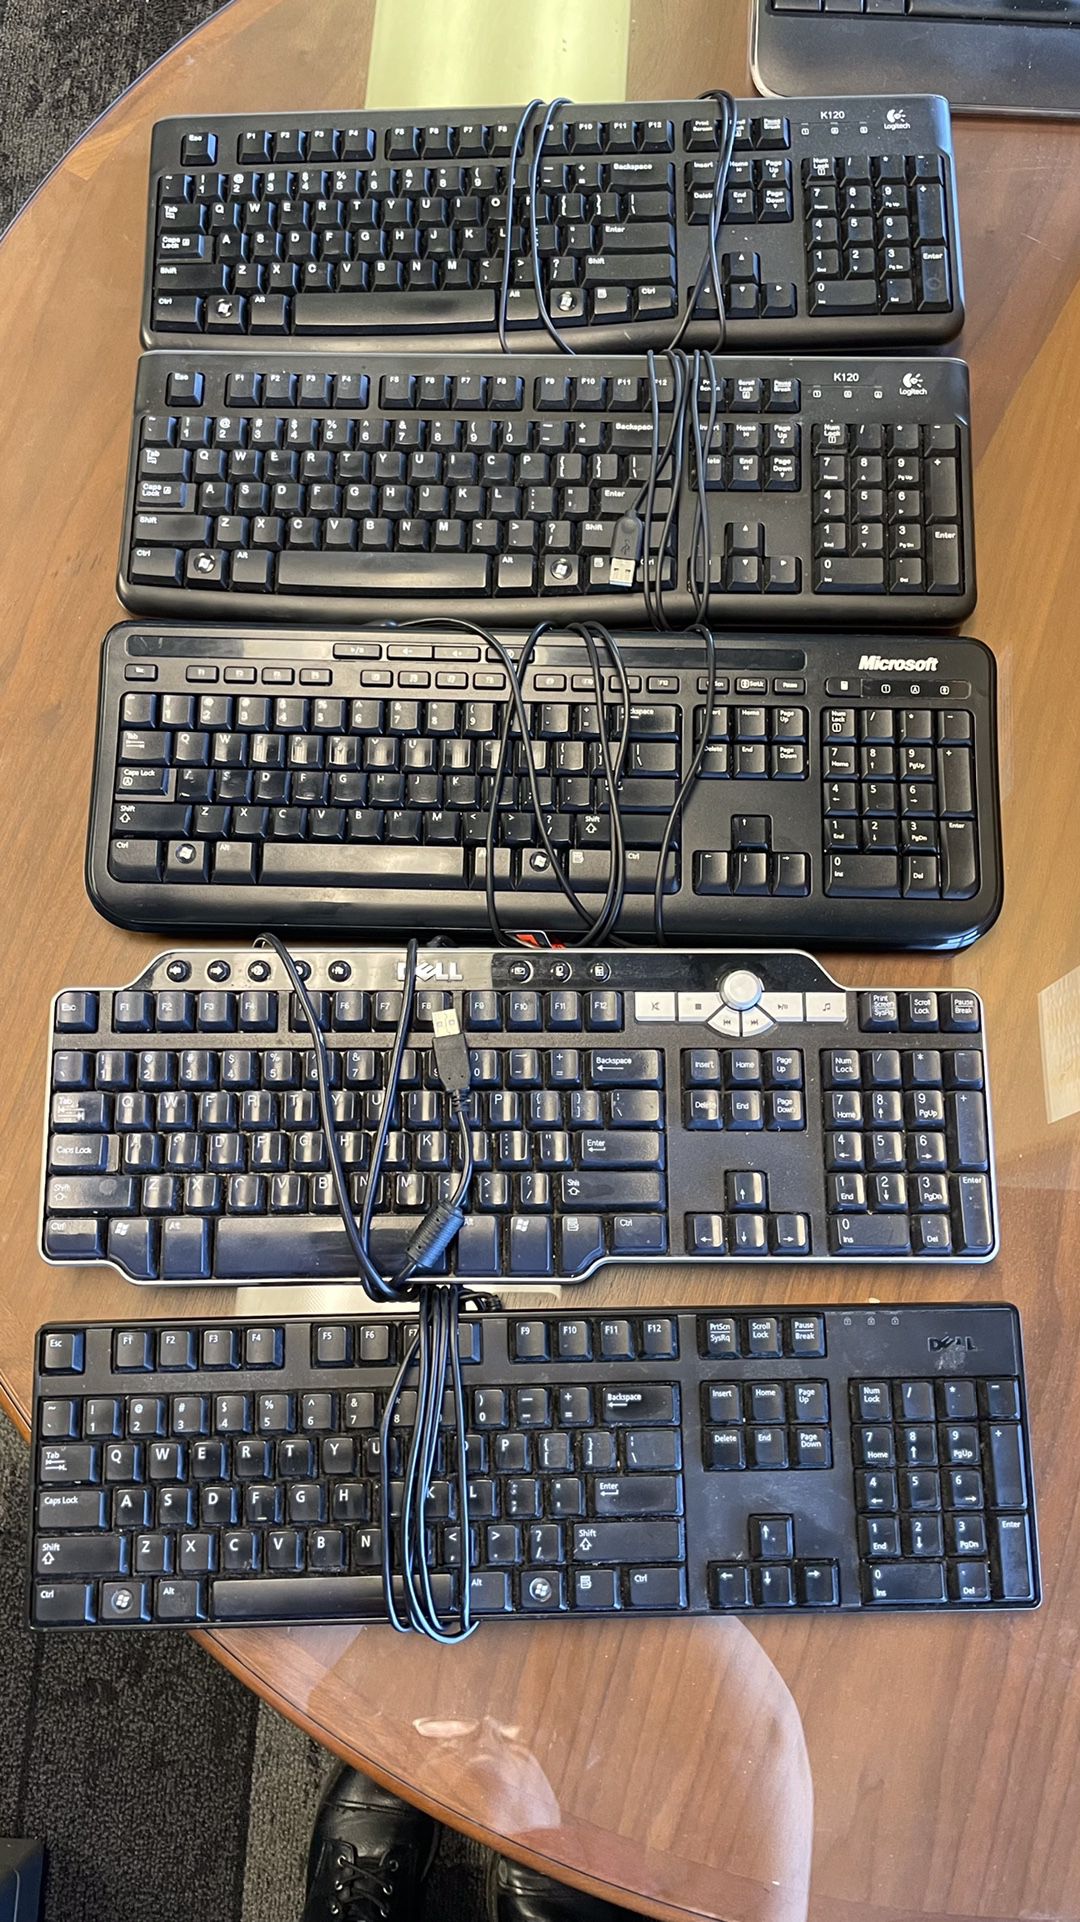 Wired Computer Keyboards (5)